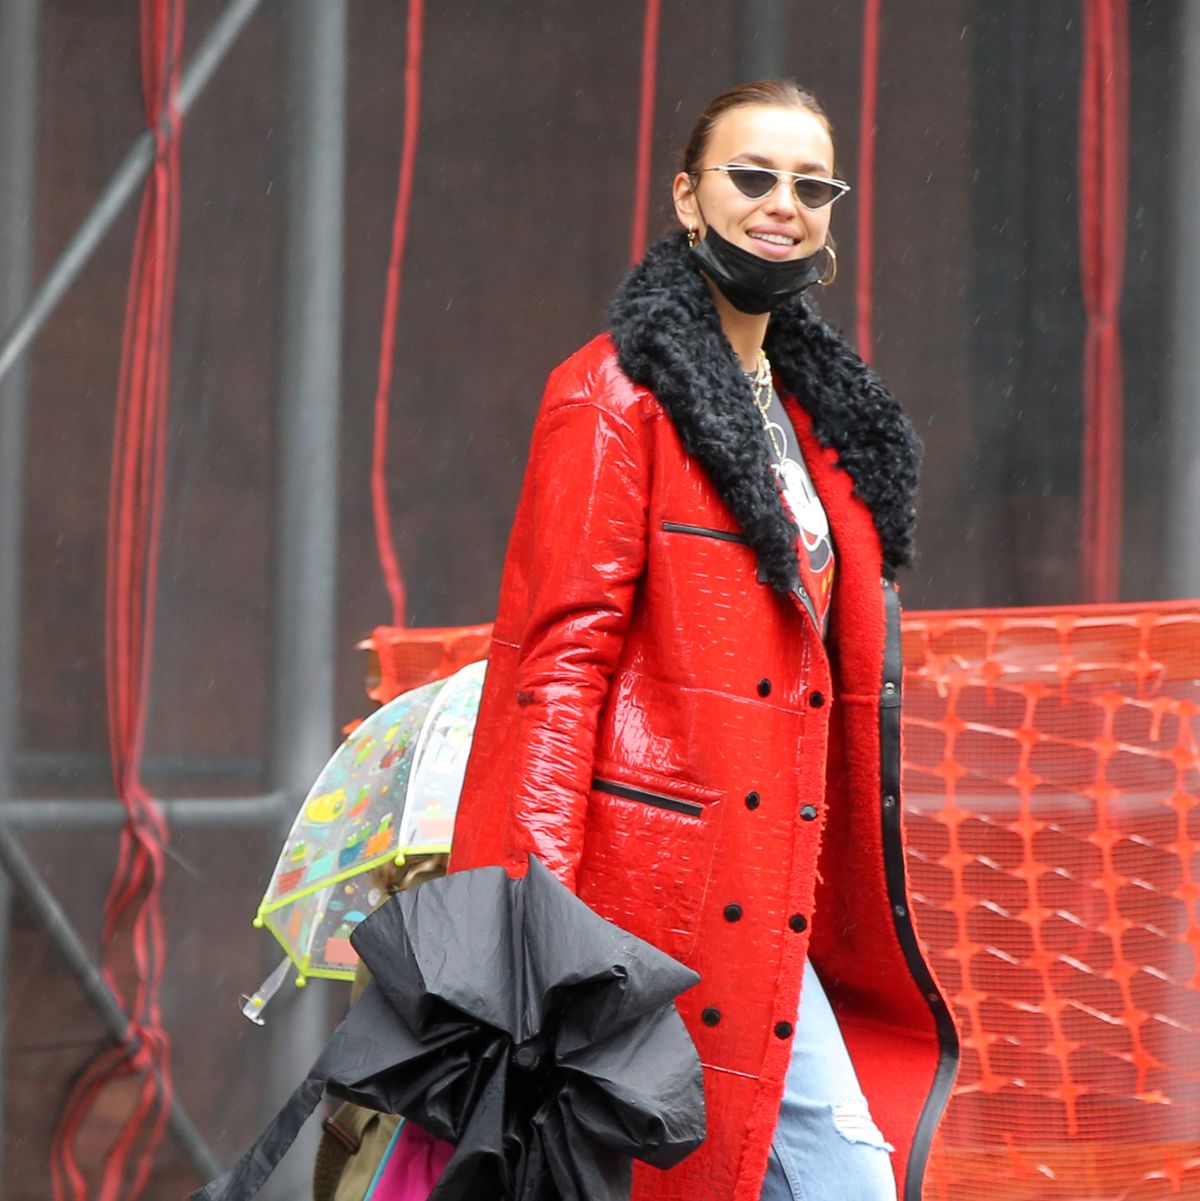 Get Model Irina Shayk's look, with DYLON Rosewood Red fabric dye!